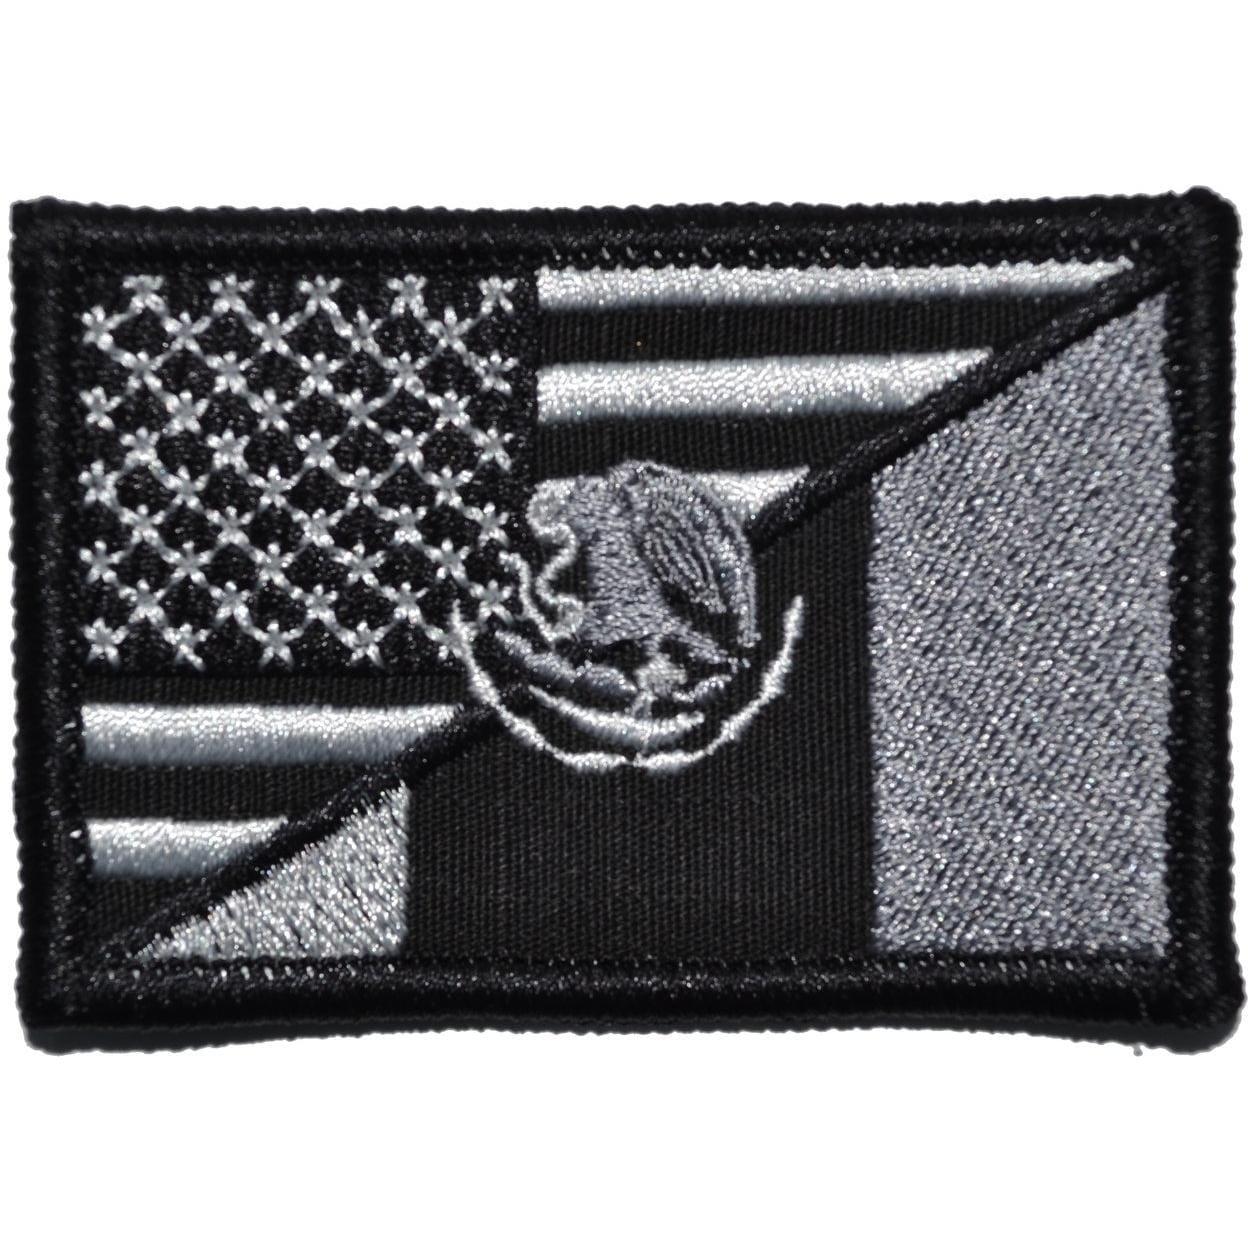 Tactical Gear Junkie Patches Black USA / Mexico Flag Patch 2x3